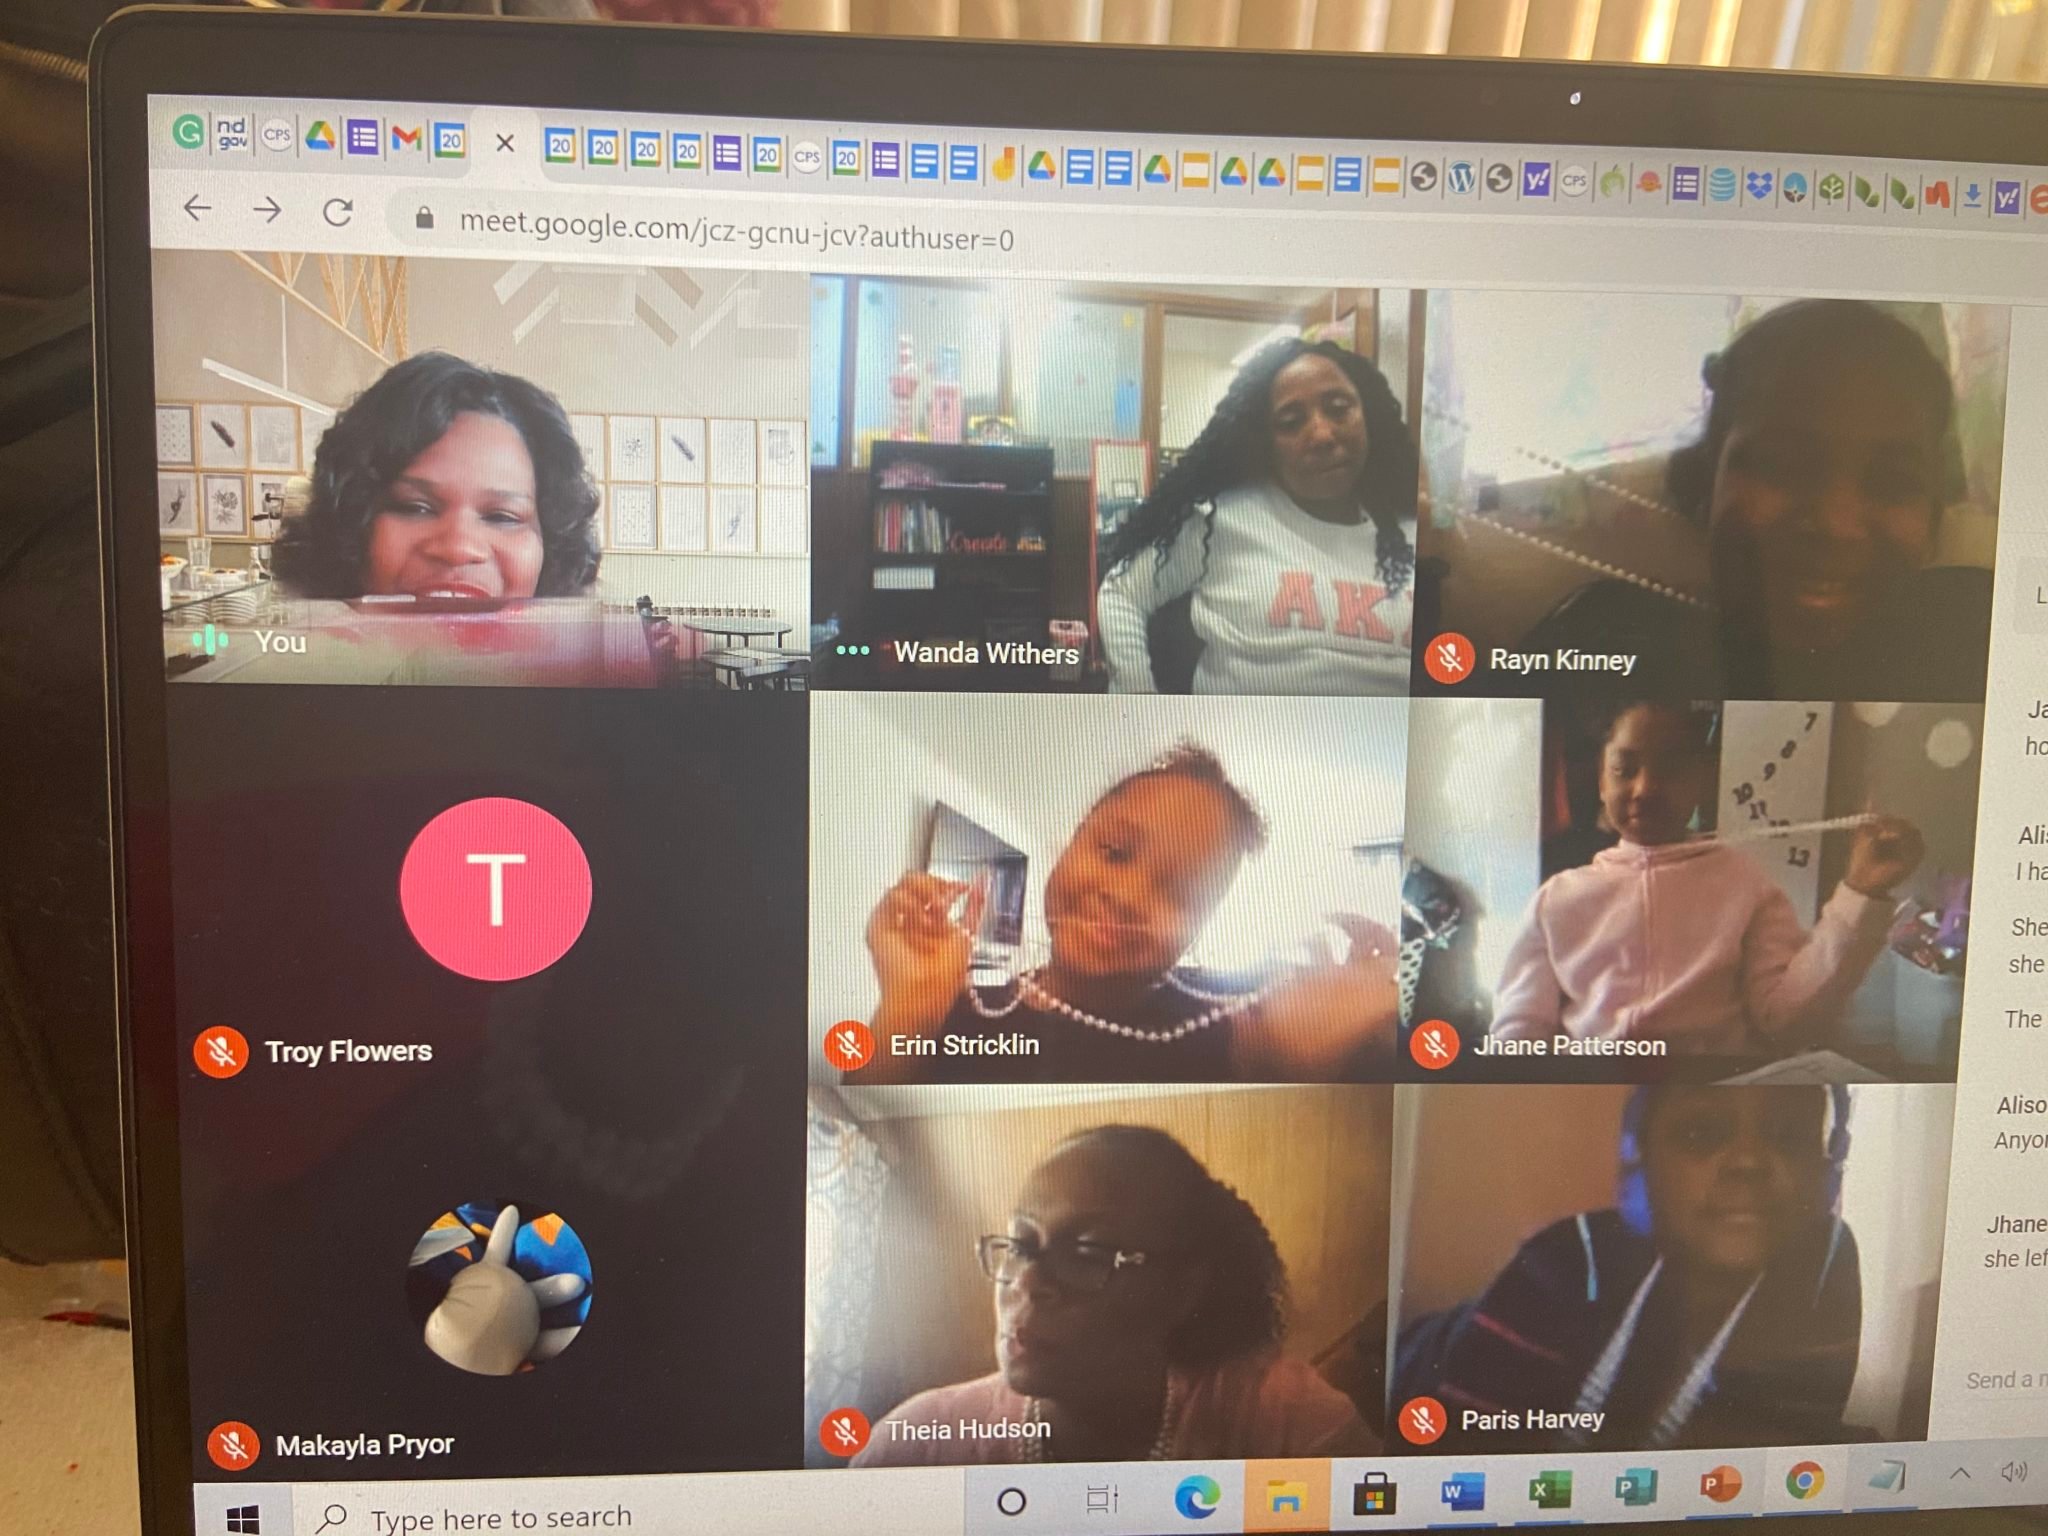 Girls meeting on a zoom call